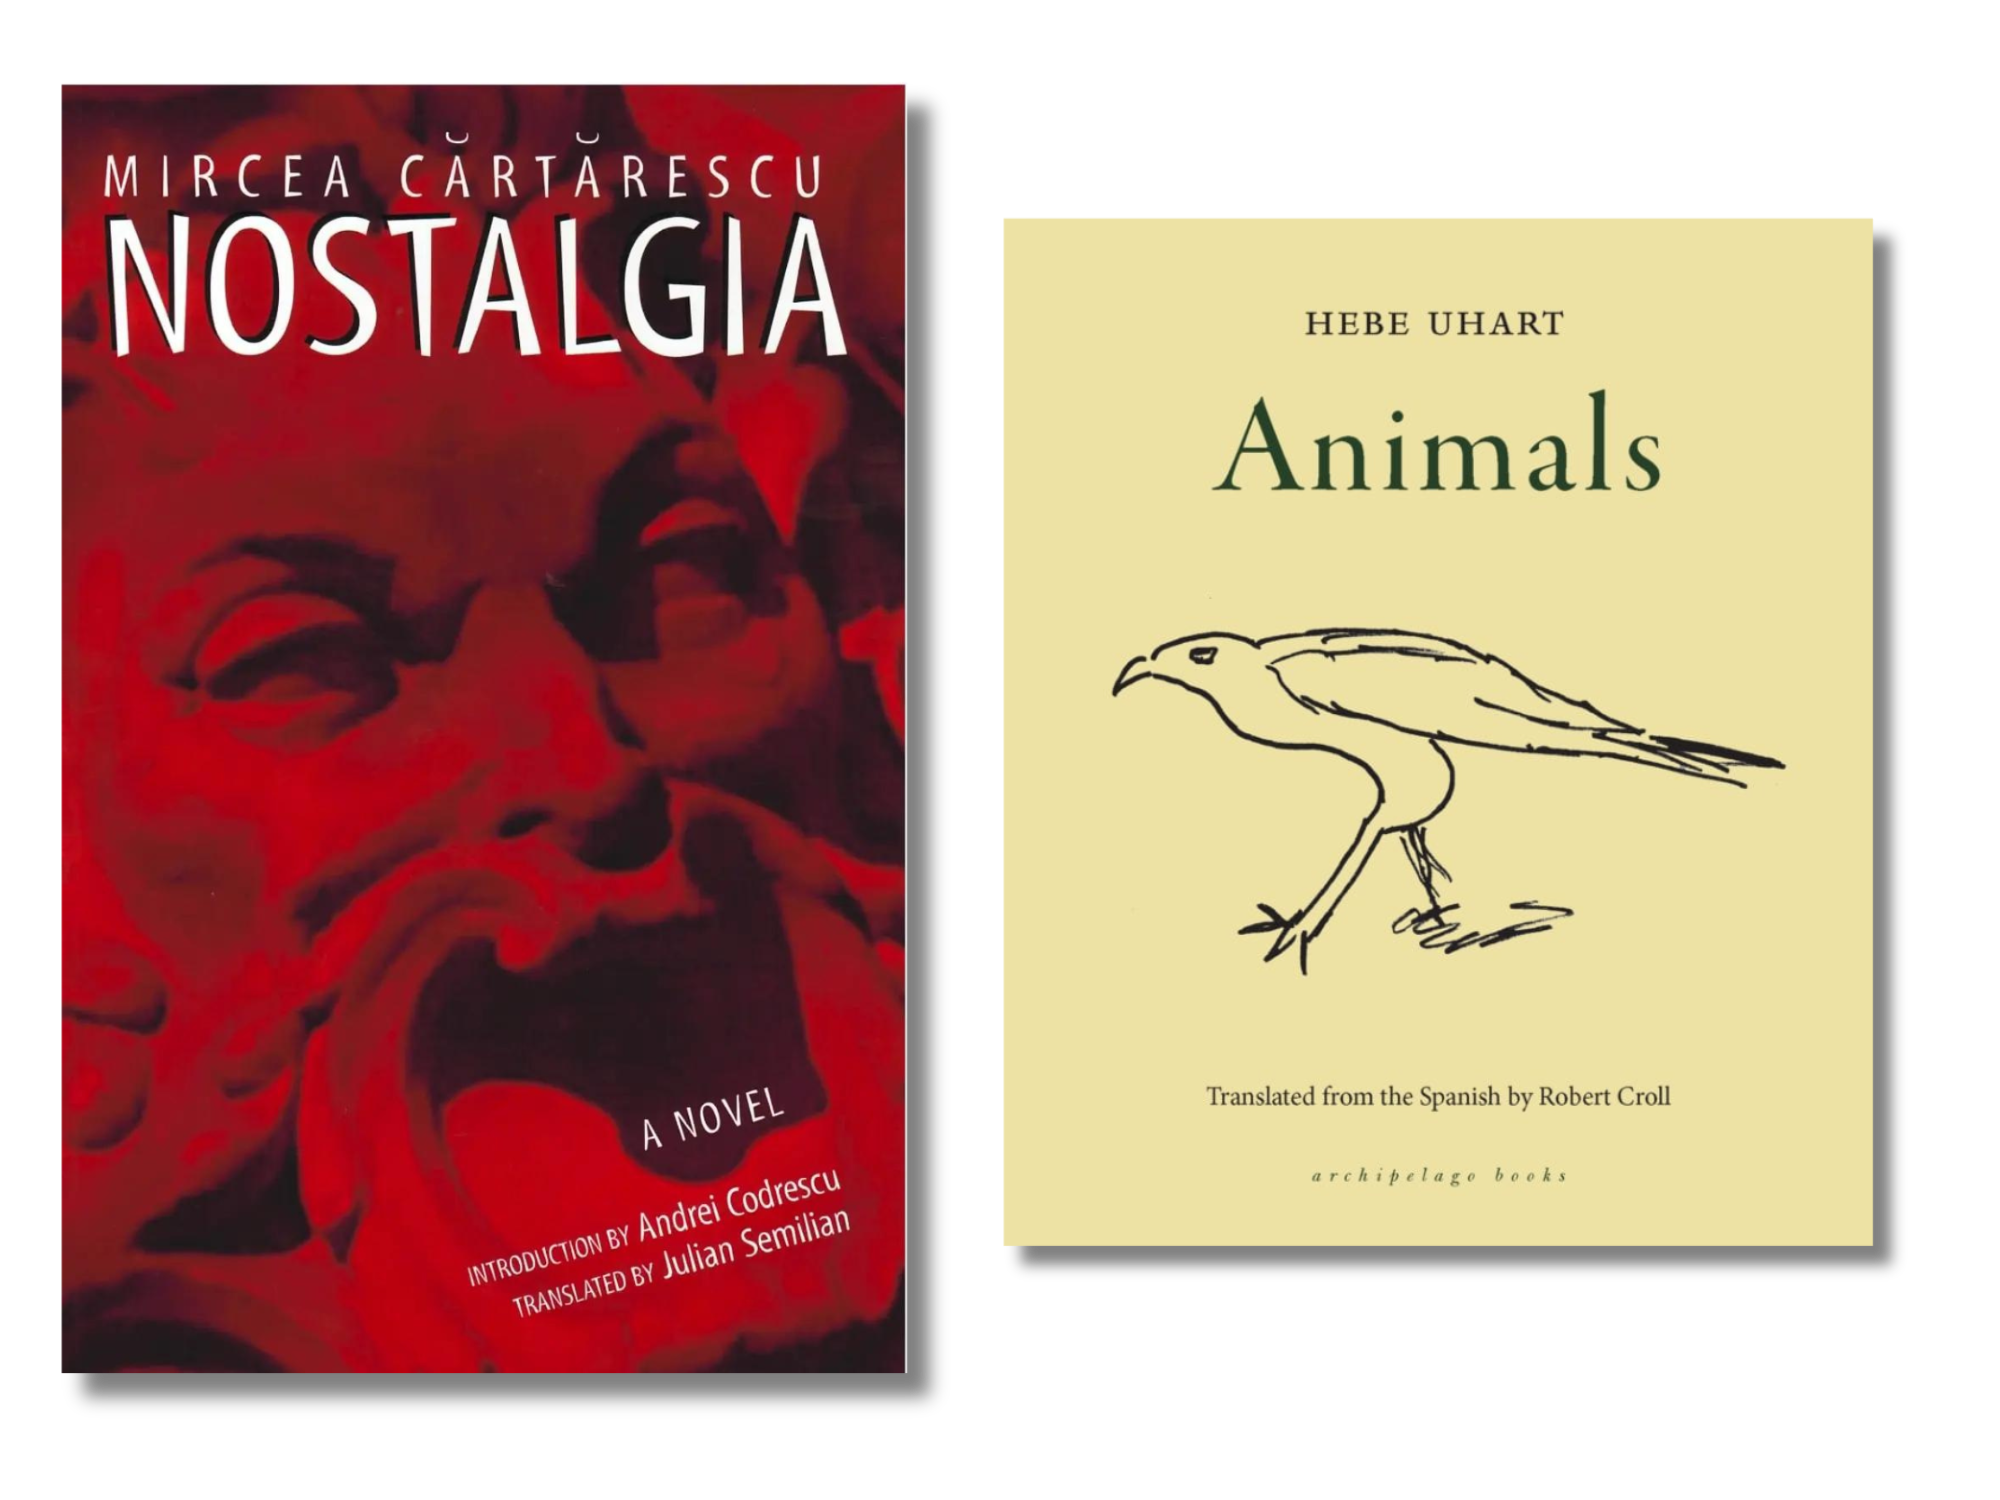 The cover of Mircea Cartarescu's "Nostalgia," translated by Julian Semilian, and the cover of "Animals" by Hebe Uhart, translated by Robert Croll